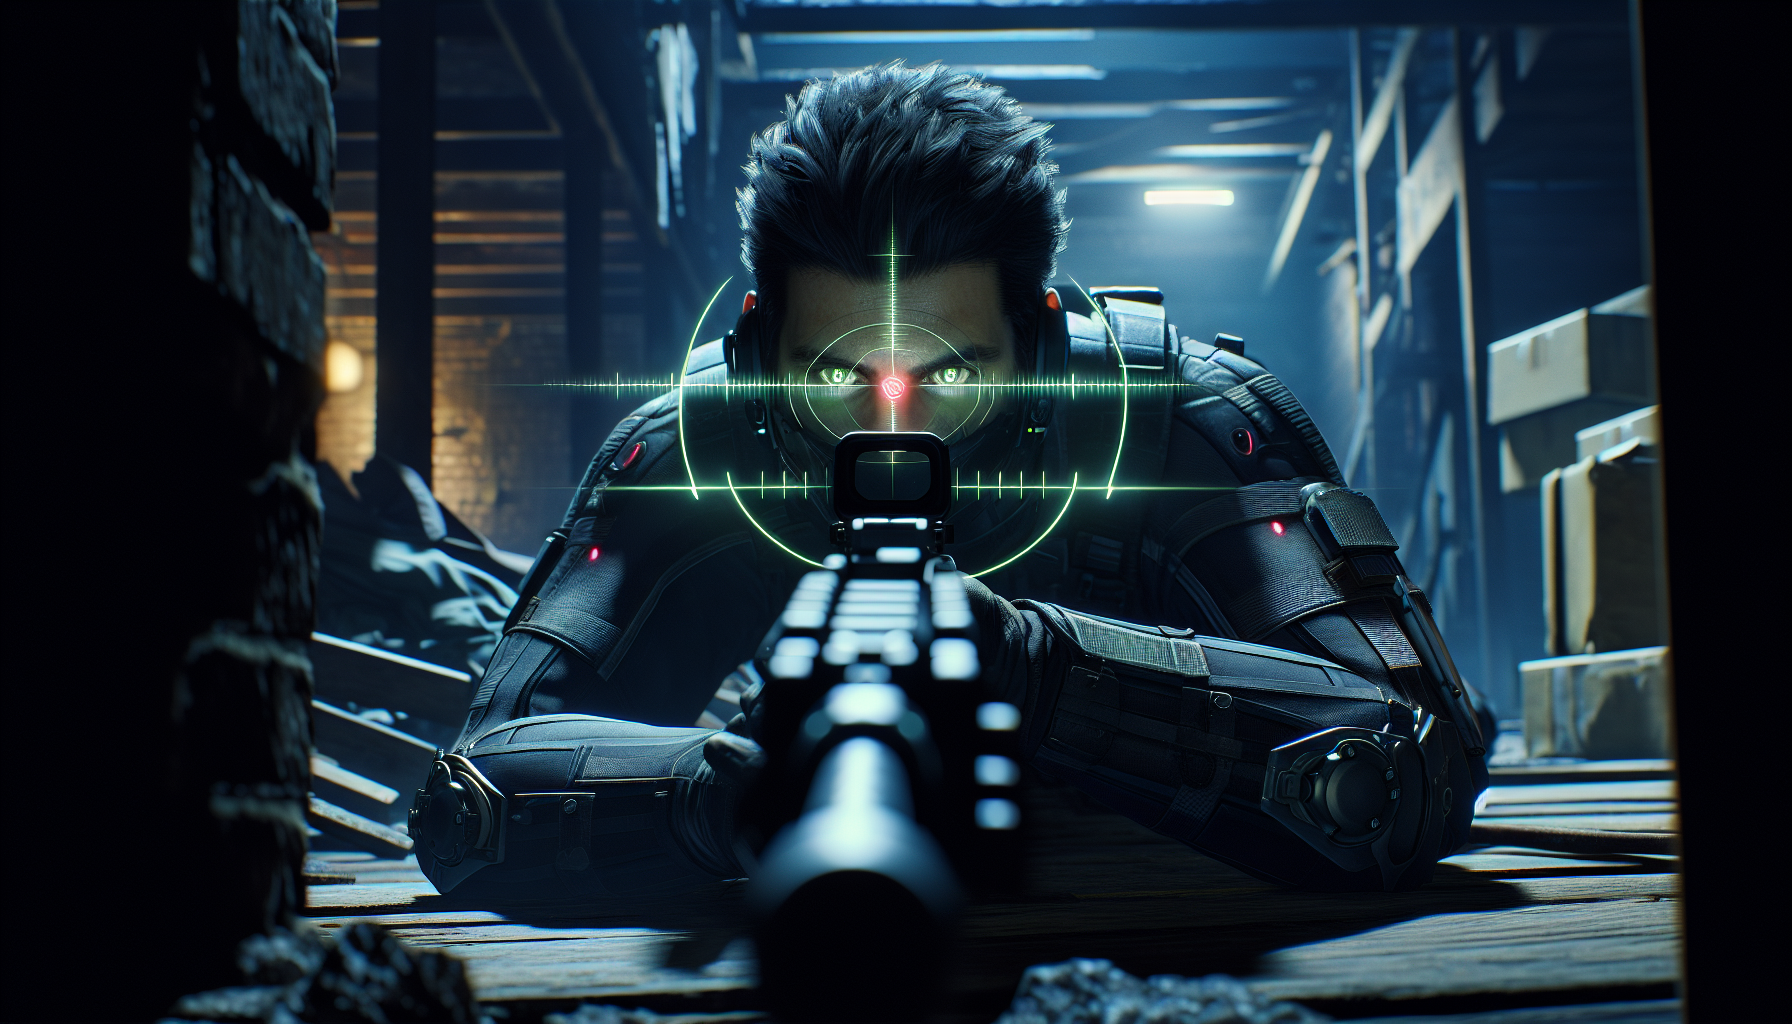 A digital illustration showing a player using Tarkov cheats to gain an advantage in the game.